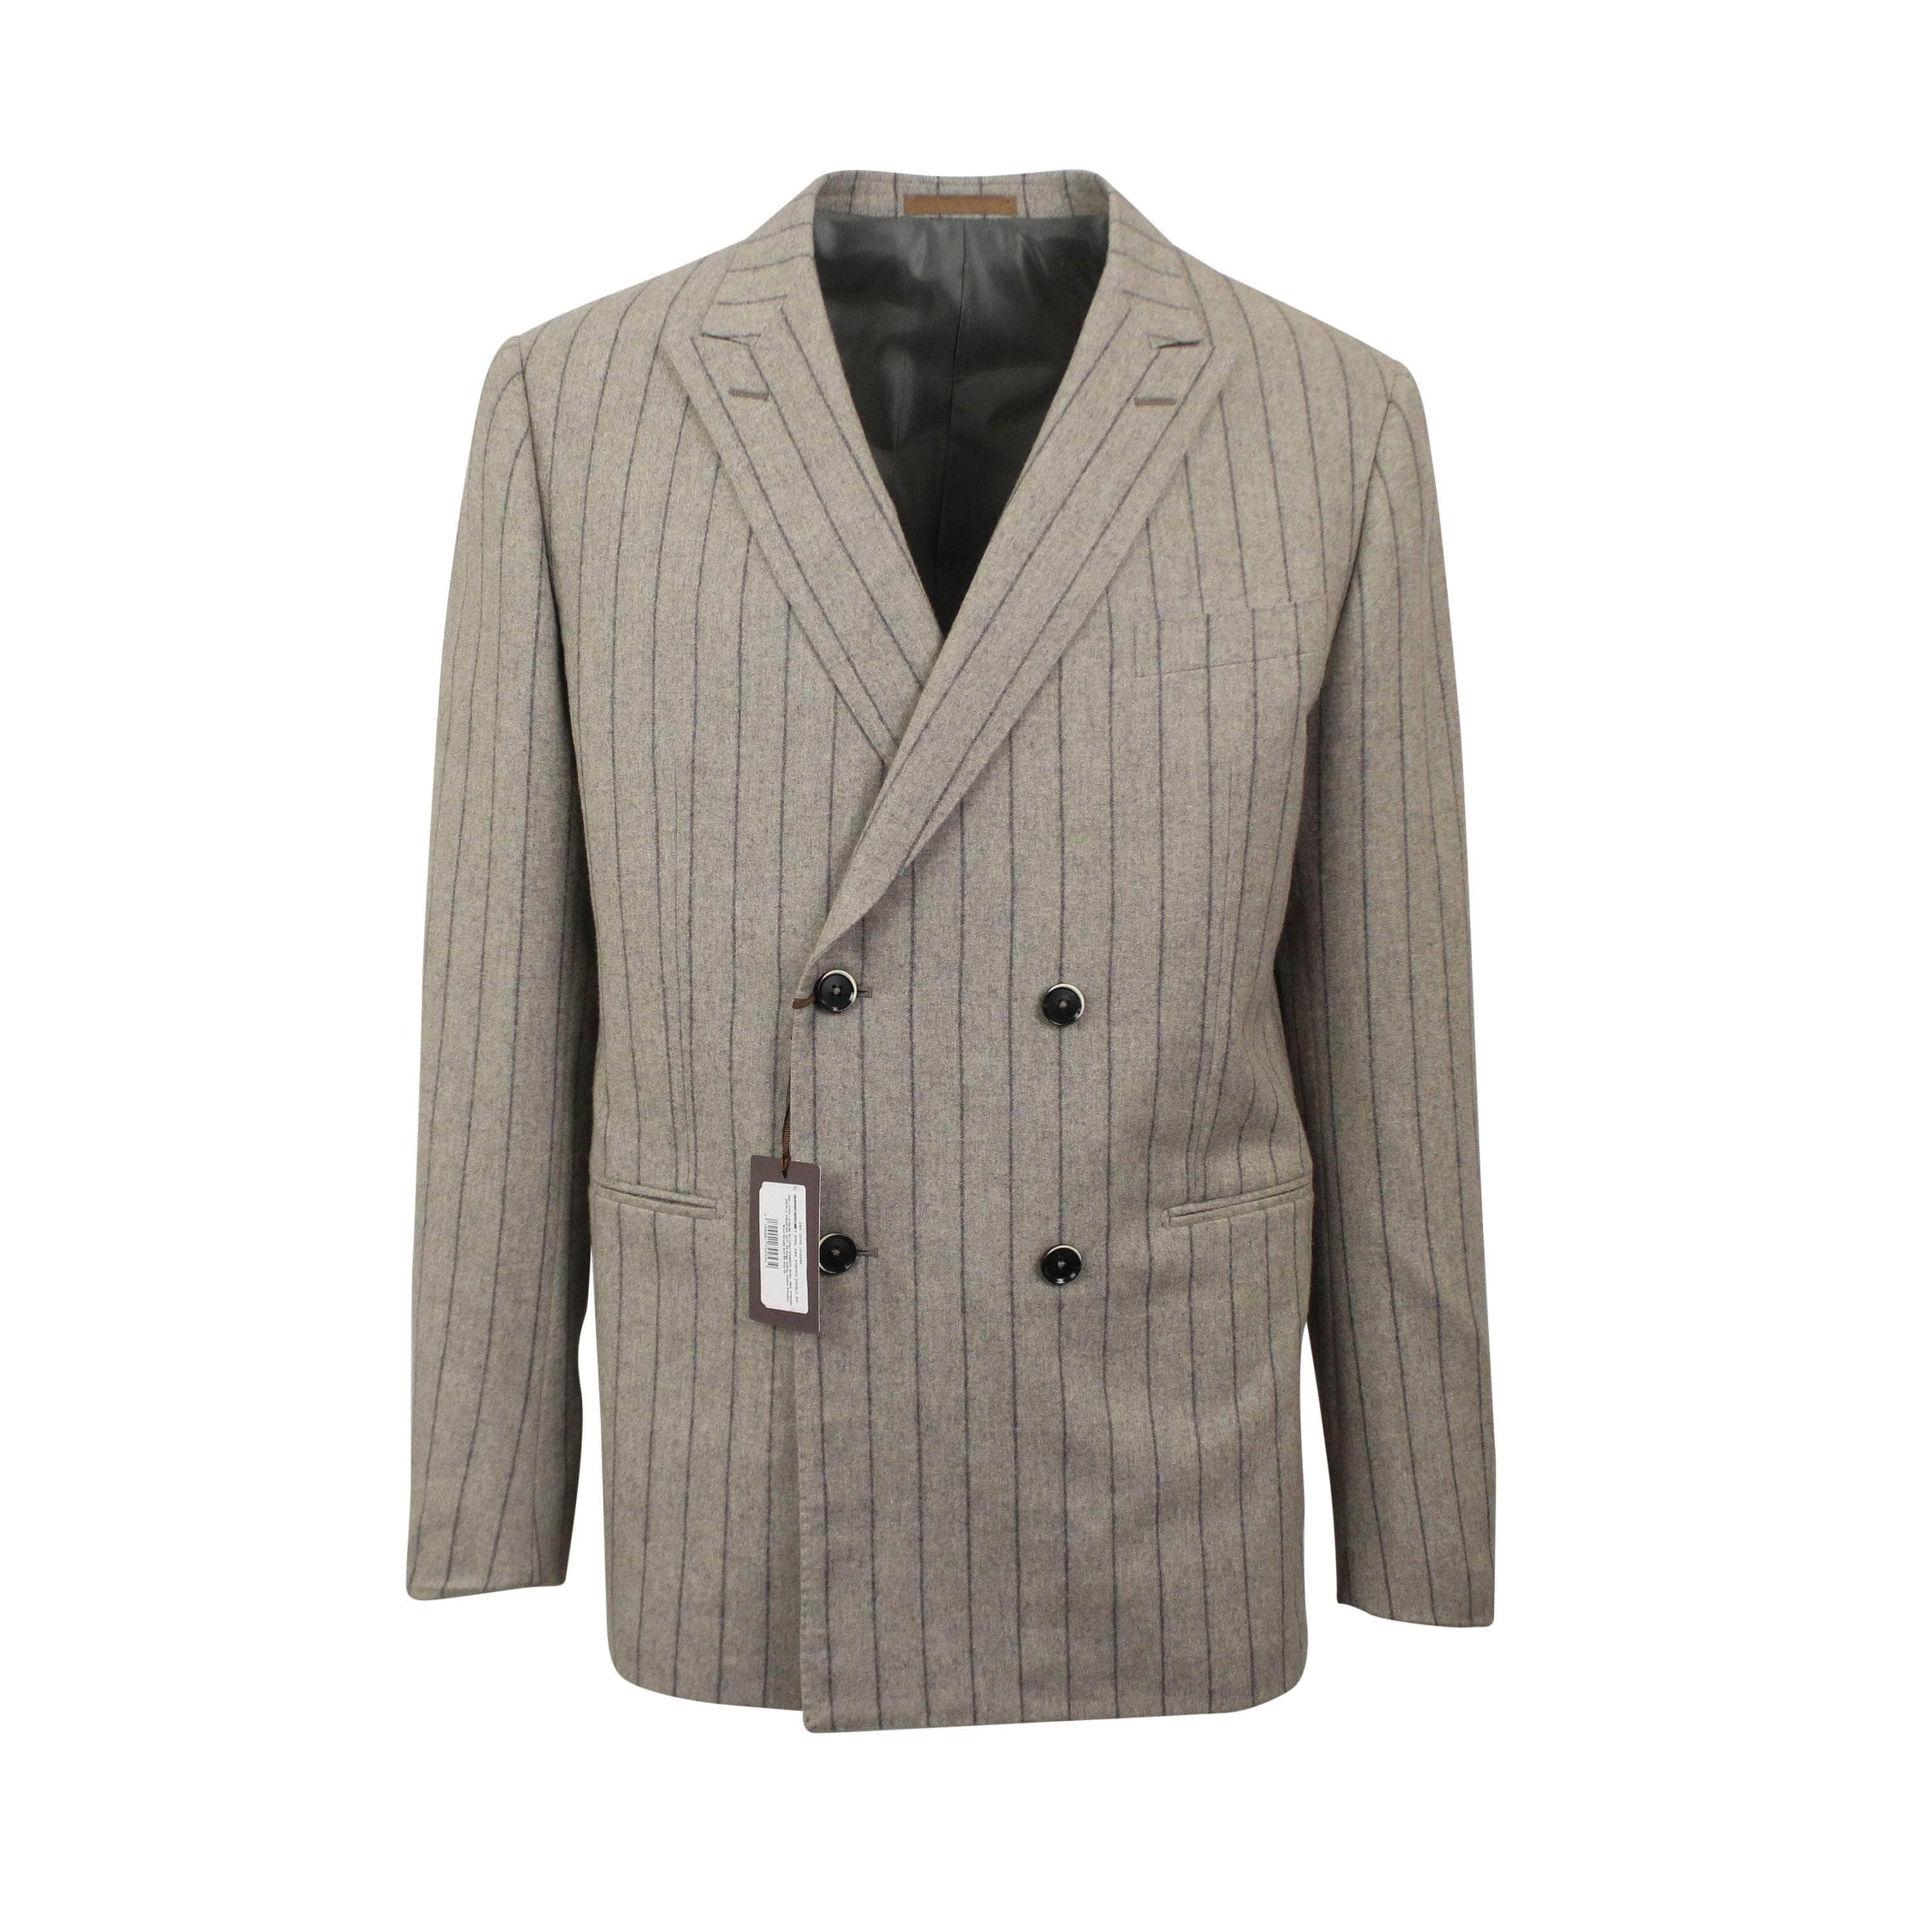 Caruso 750-1000, caruso, channelenable-all, chicmi, couponcollection, main-clothing, shop375, Stadium Goods 54 Beige Double-Breasted Wool Striped Suit 9R CRS-XTPS-0194/54 CRS-XTPS-0194/54